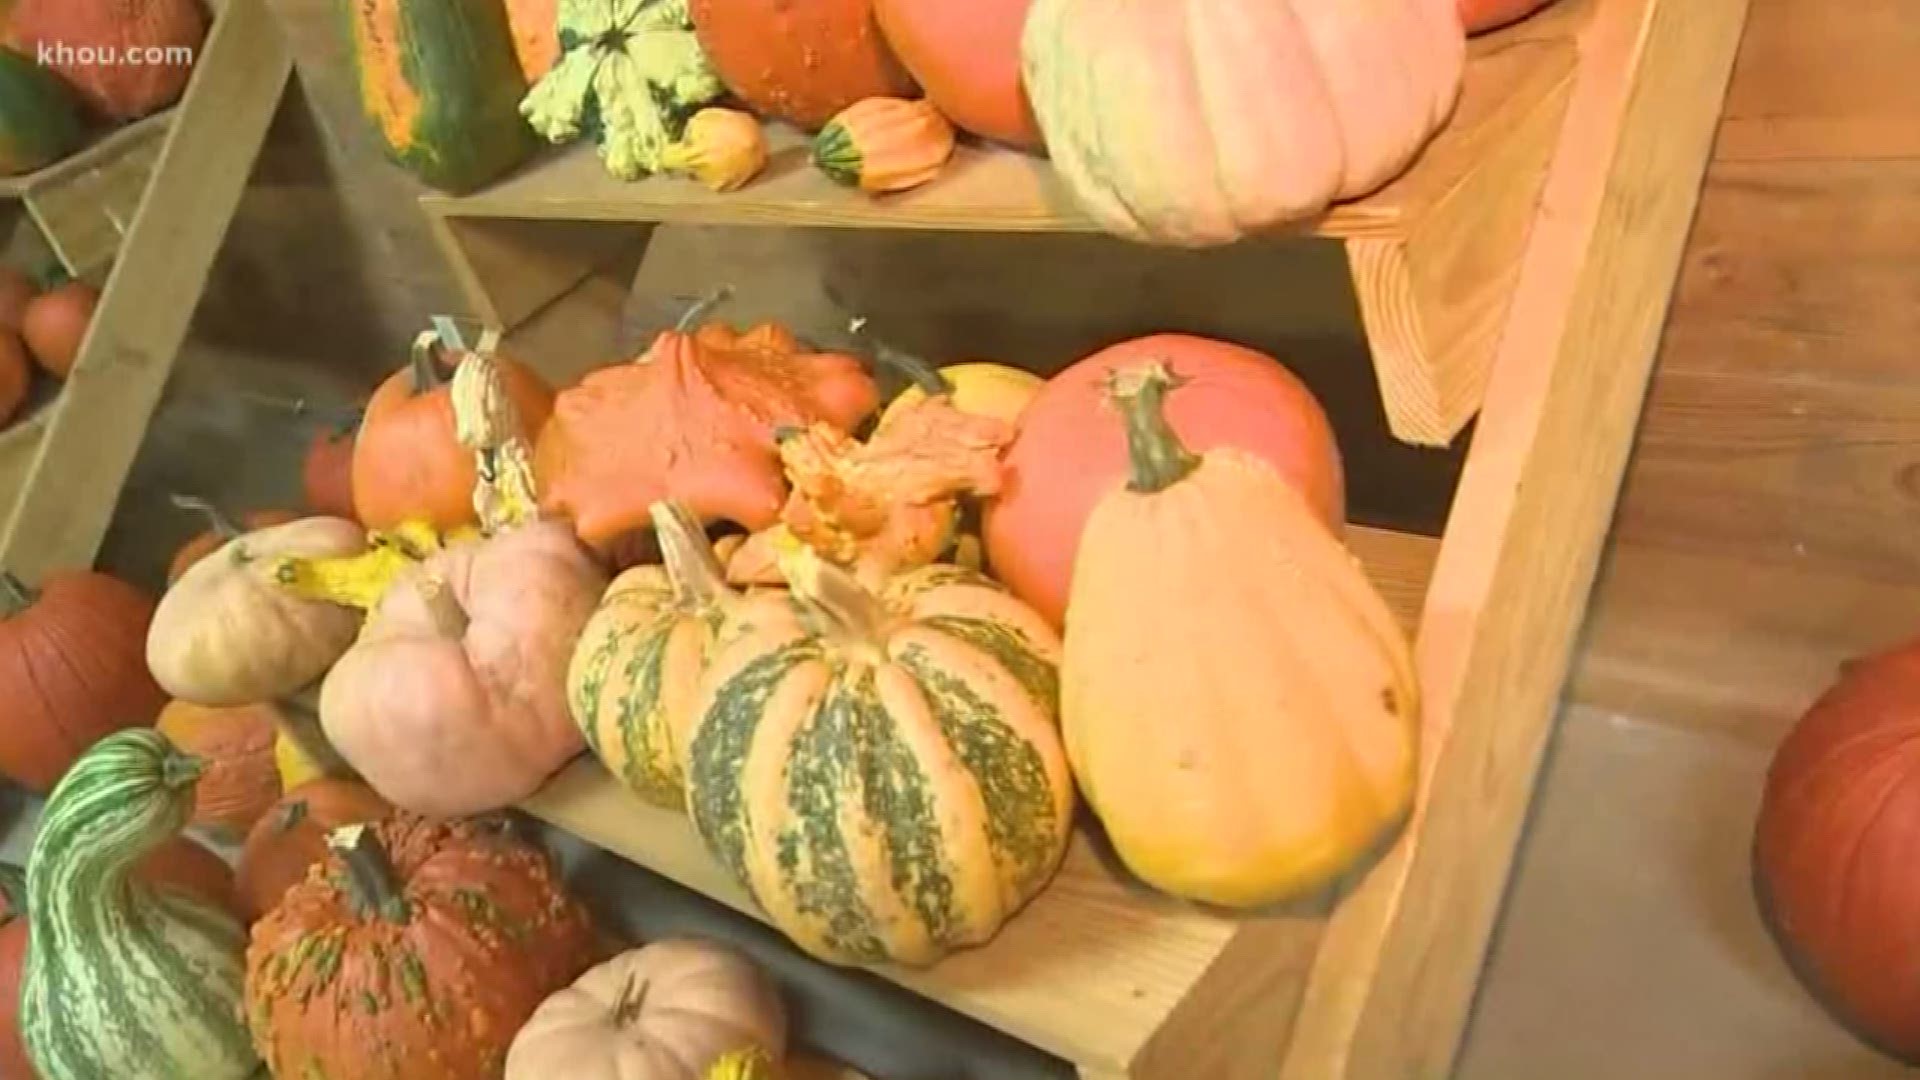 There's a lot to “dew” at the Dewberry Farm in Brookshire. From hayrides to picking pumpkins, the activities are endless. Ruben Galvan was has a preview.